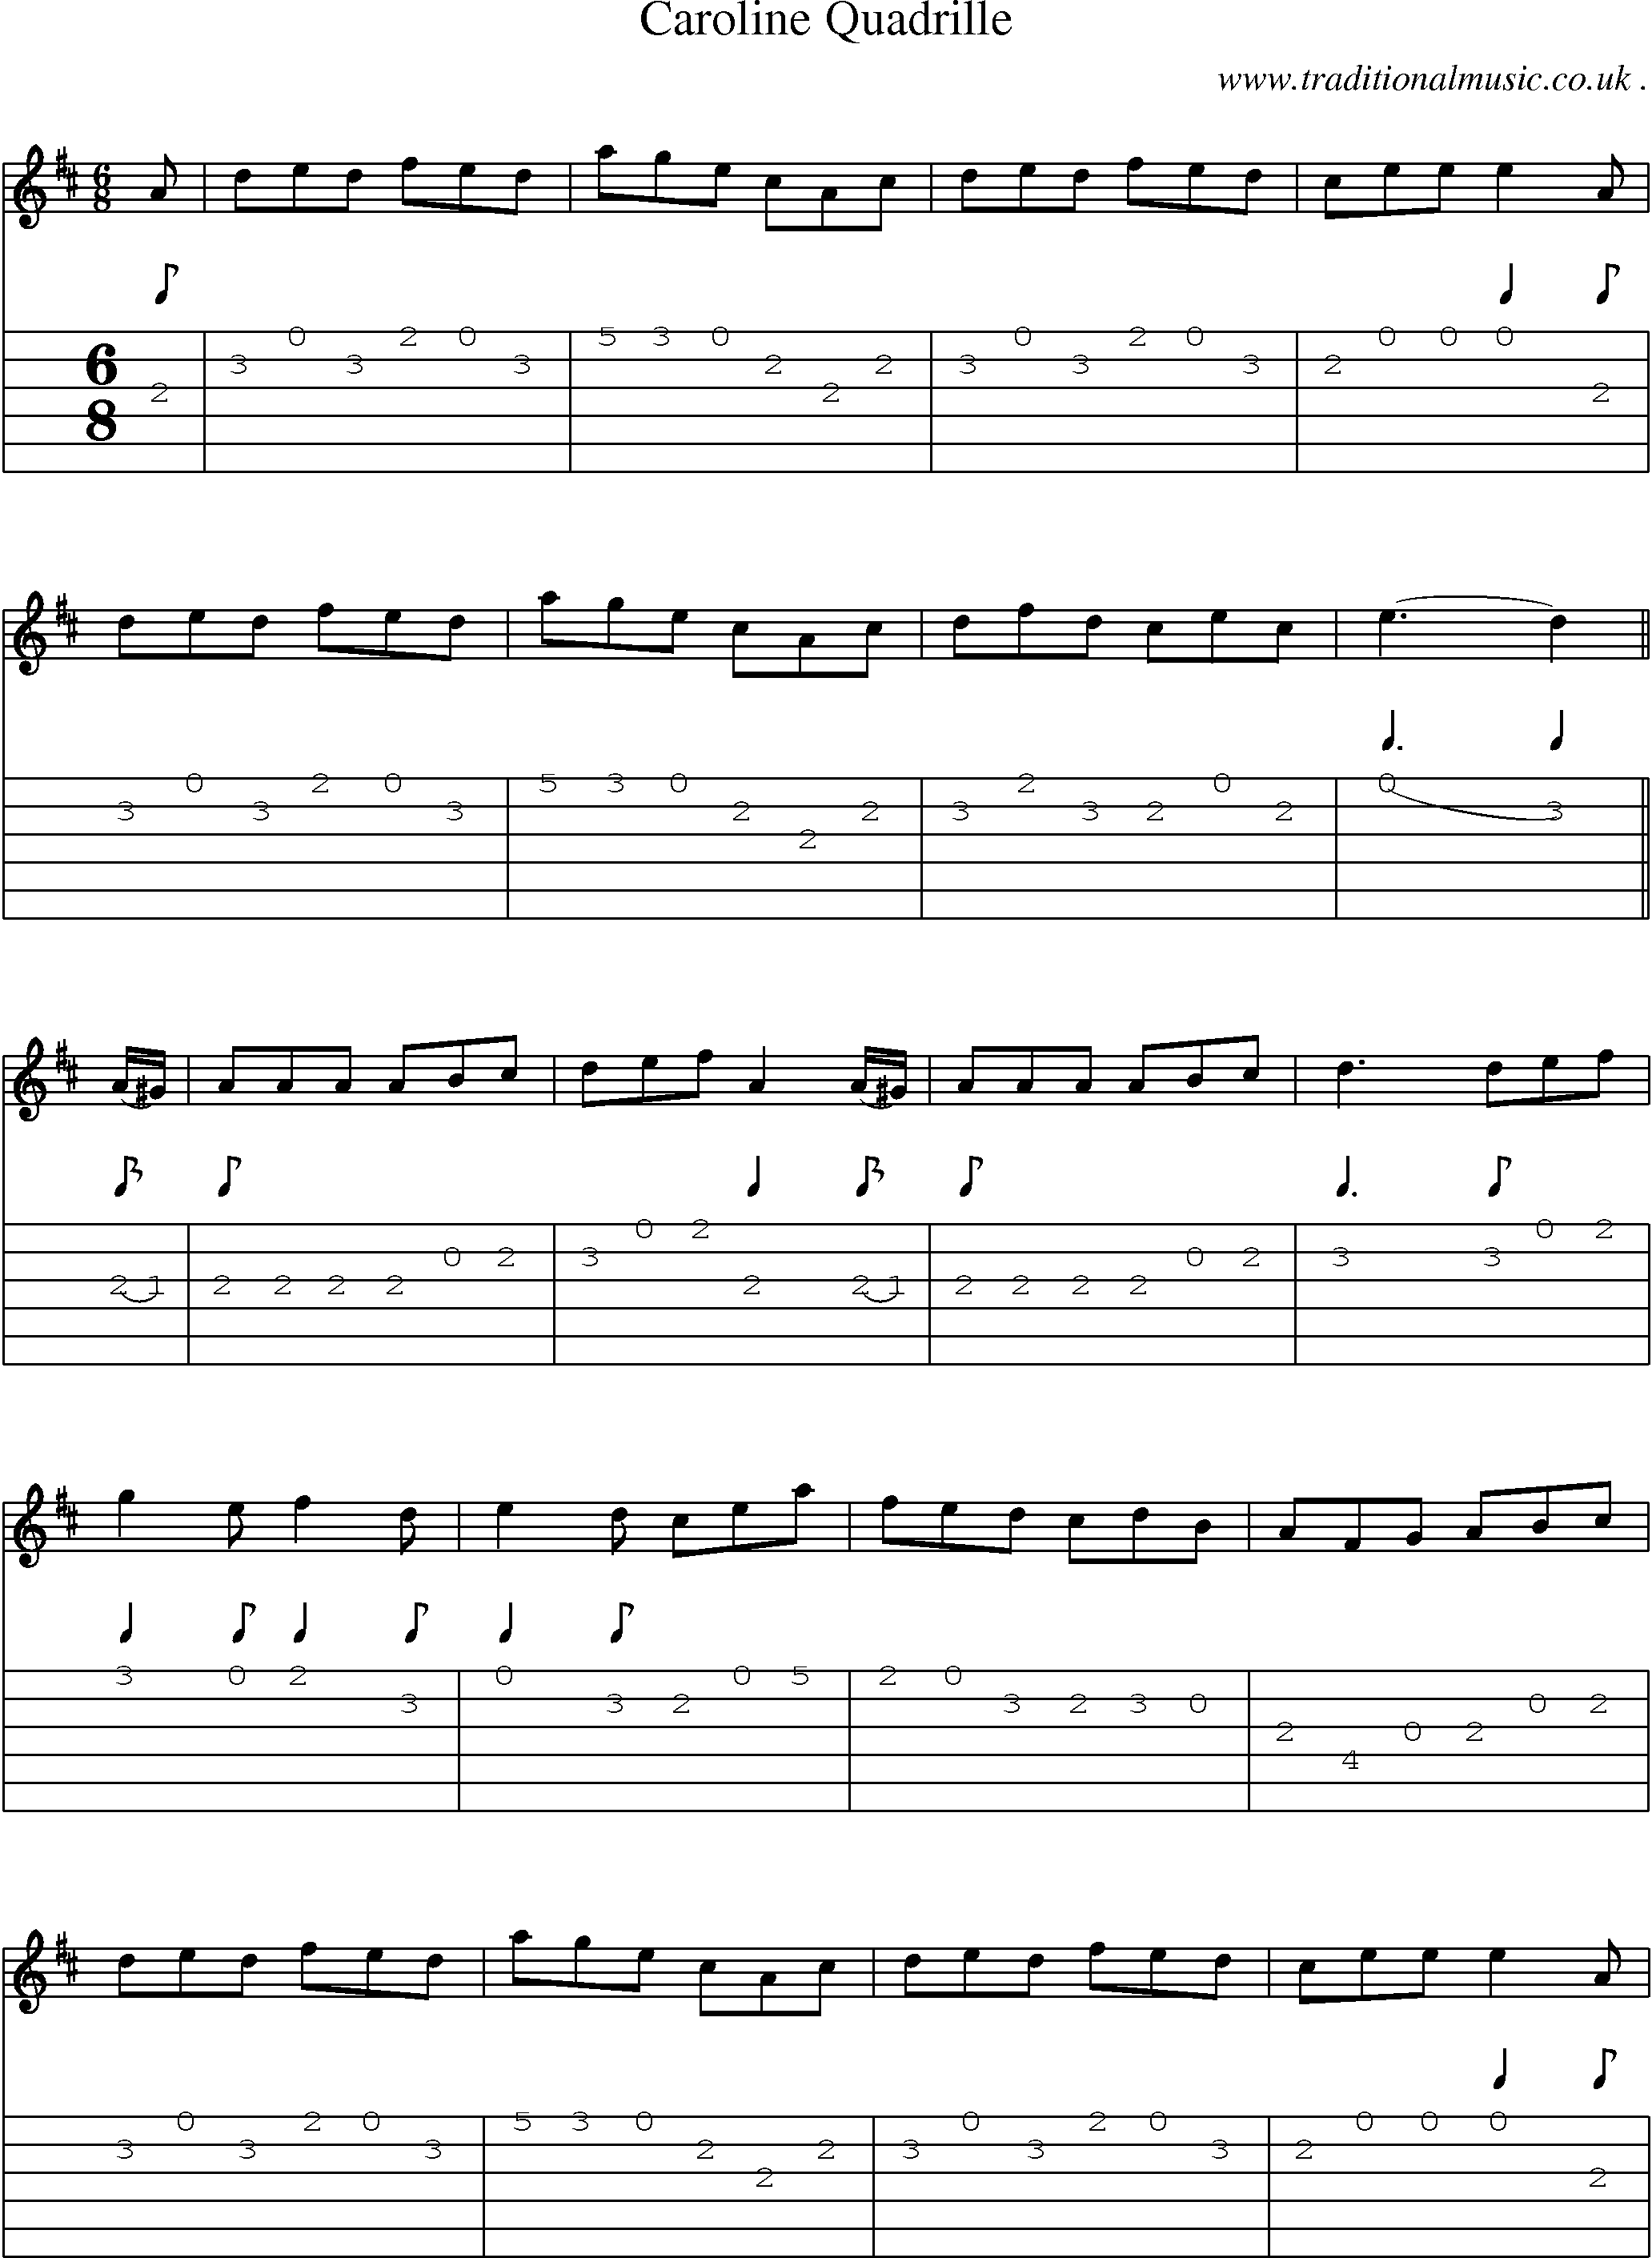 Sheet-Music and Guitar Tabs for Caroline Quadrille